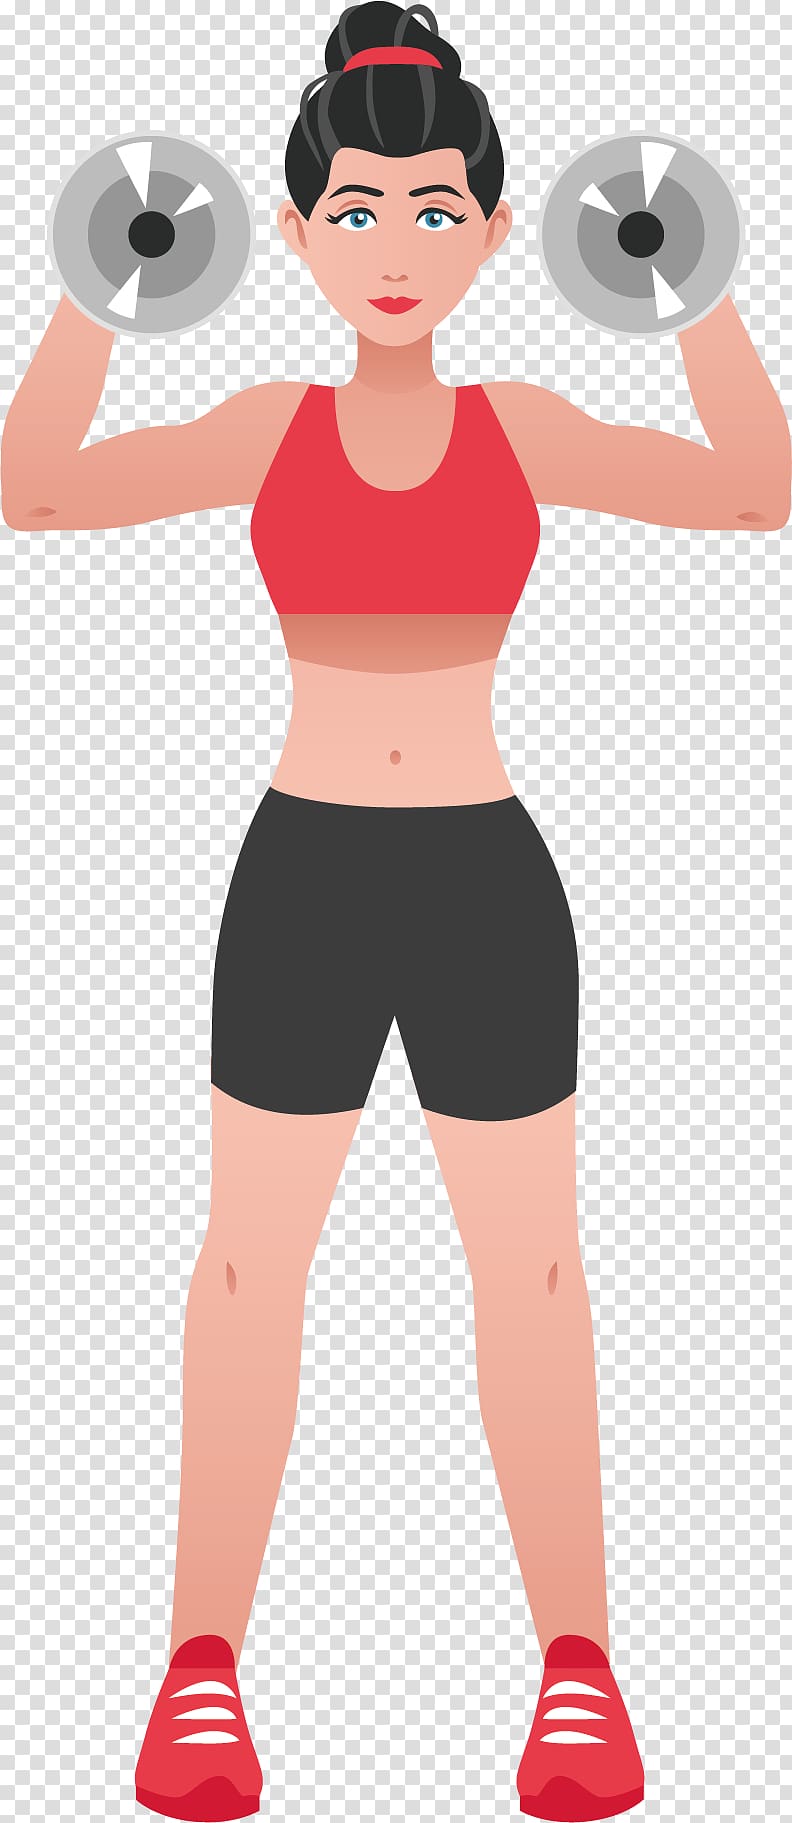 Physical fitness Bodybuilding Fitness centre Computer file, Fitness girl transparent background PNG clipart